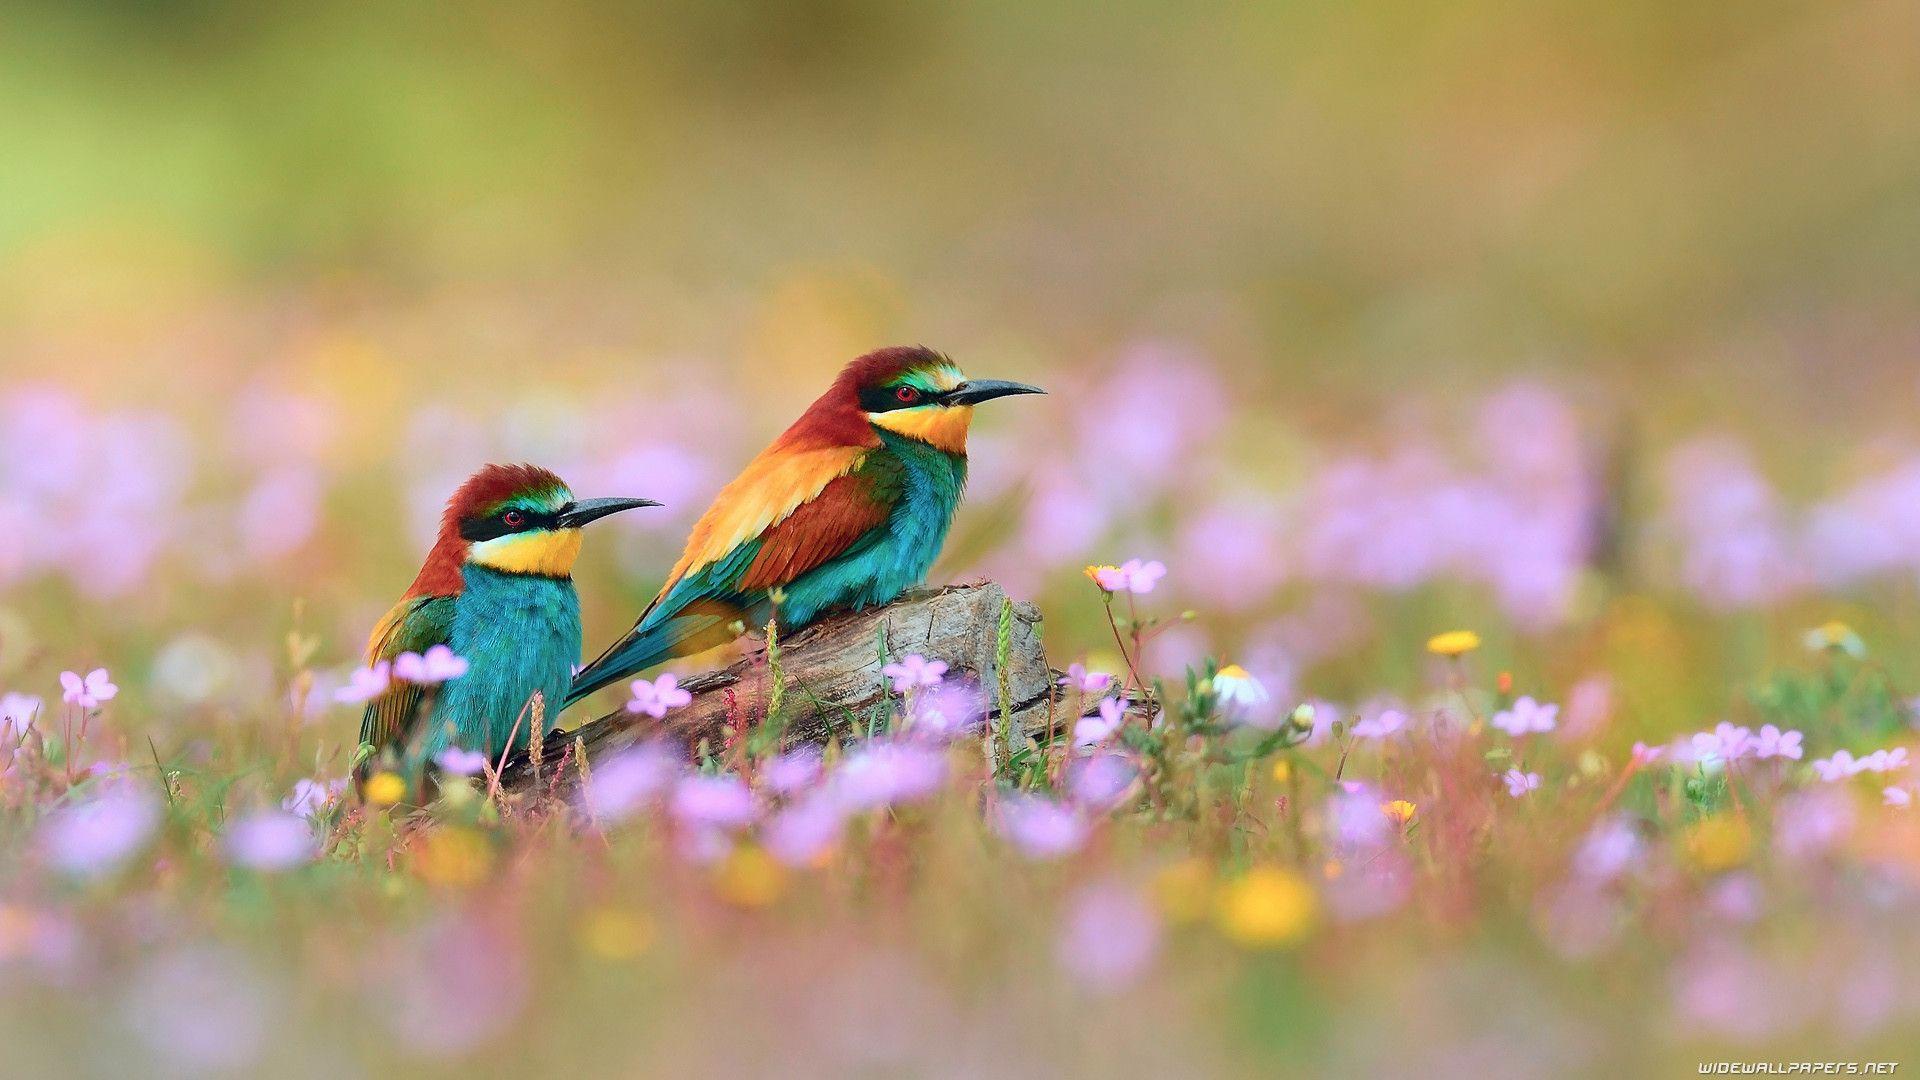 rainbow birds paint the sky in vibrant hues – The Daily Worlds